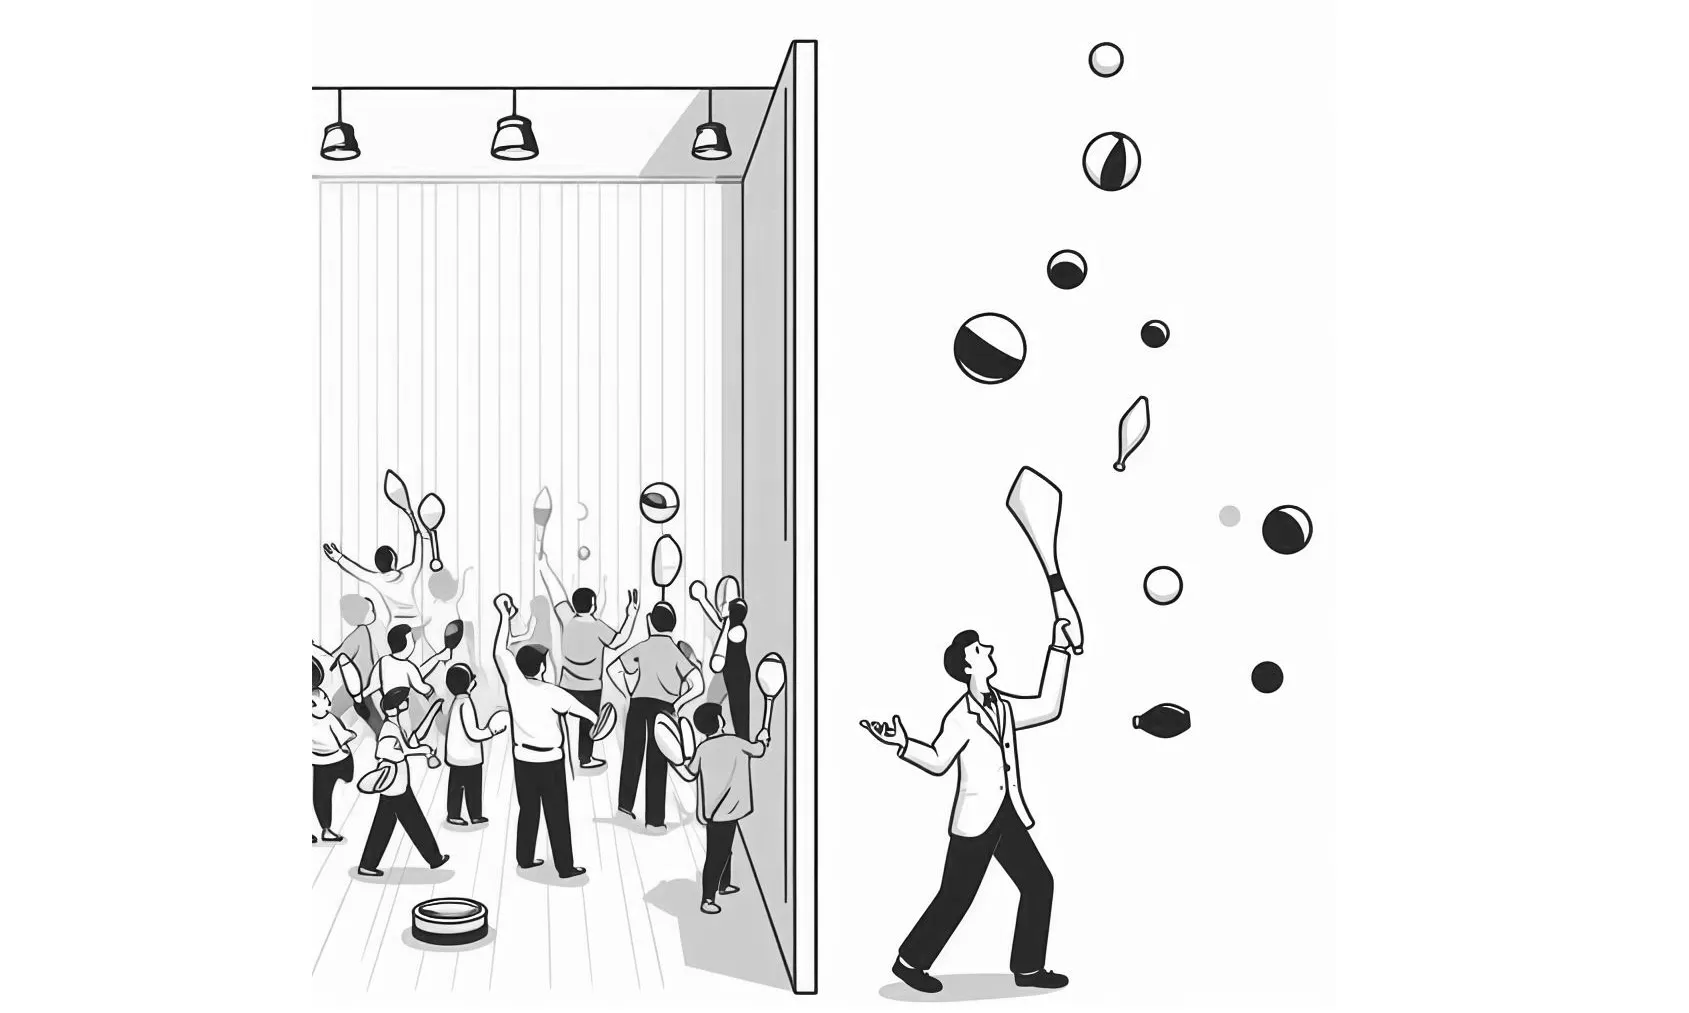 illustration showing a room packed with people comparing to a room with only 1 person and more space